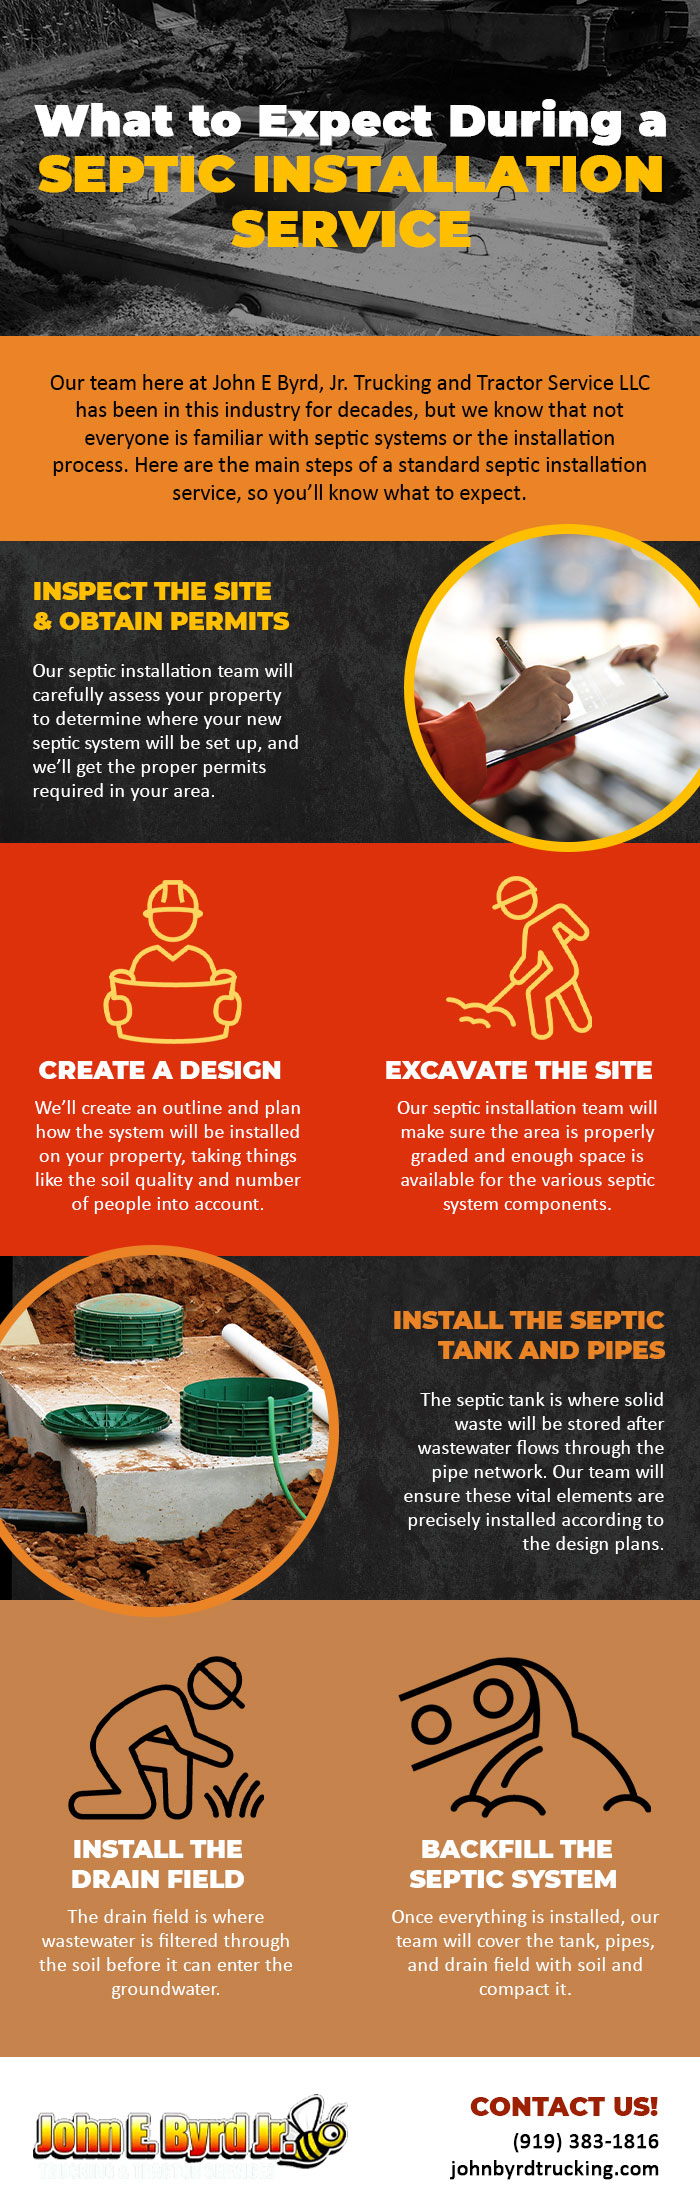 What to Expect During a Septic Installation Service